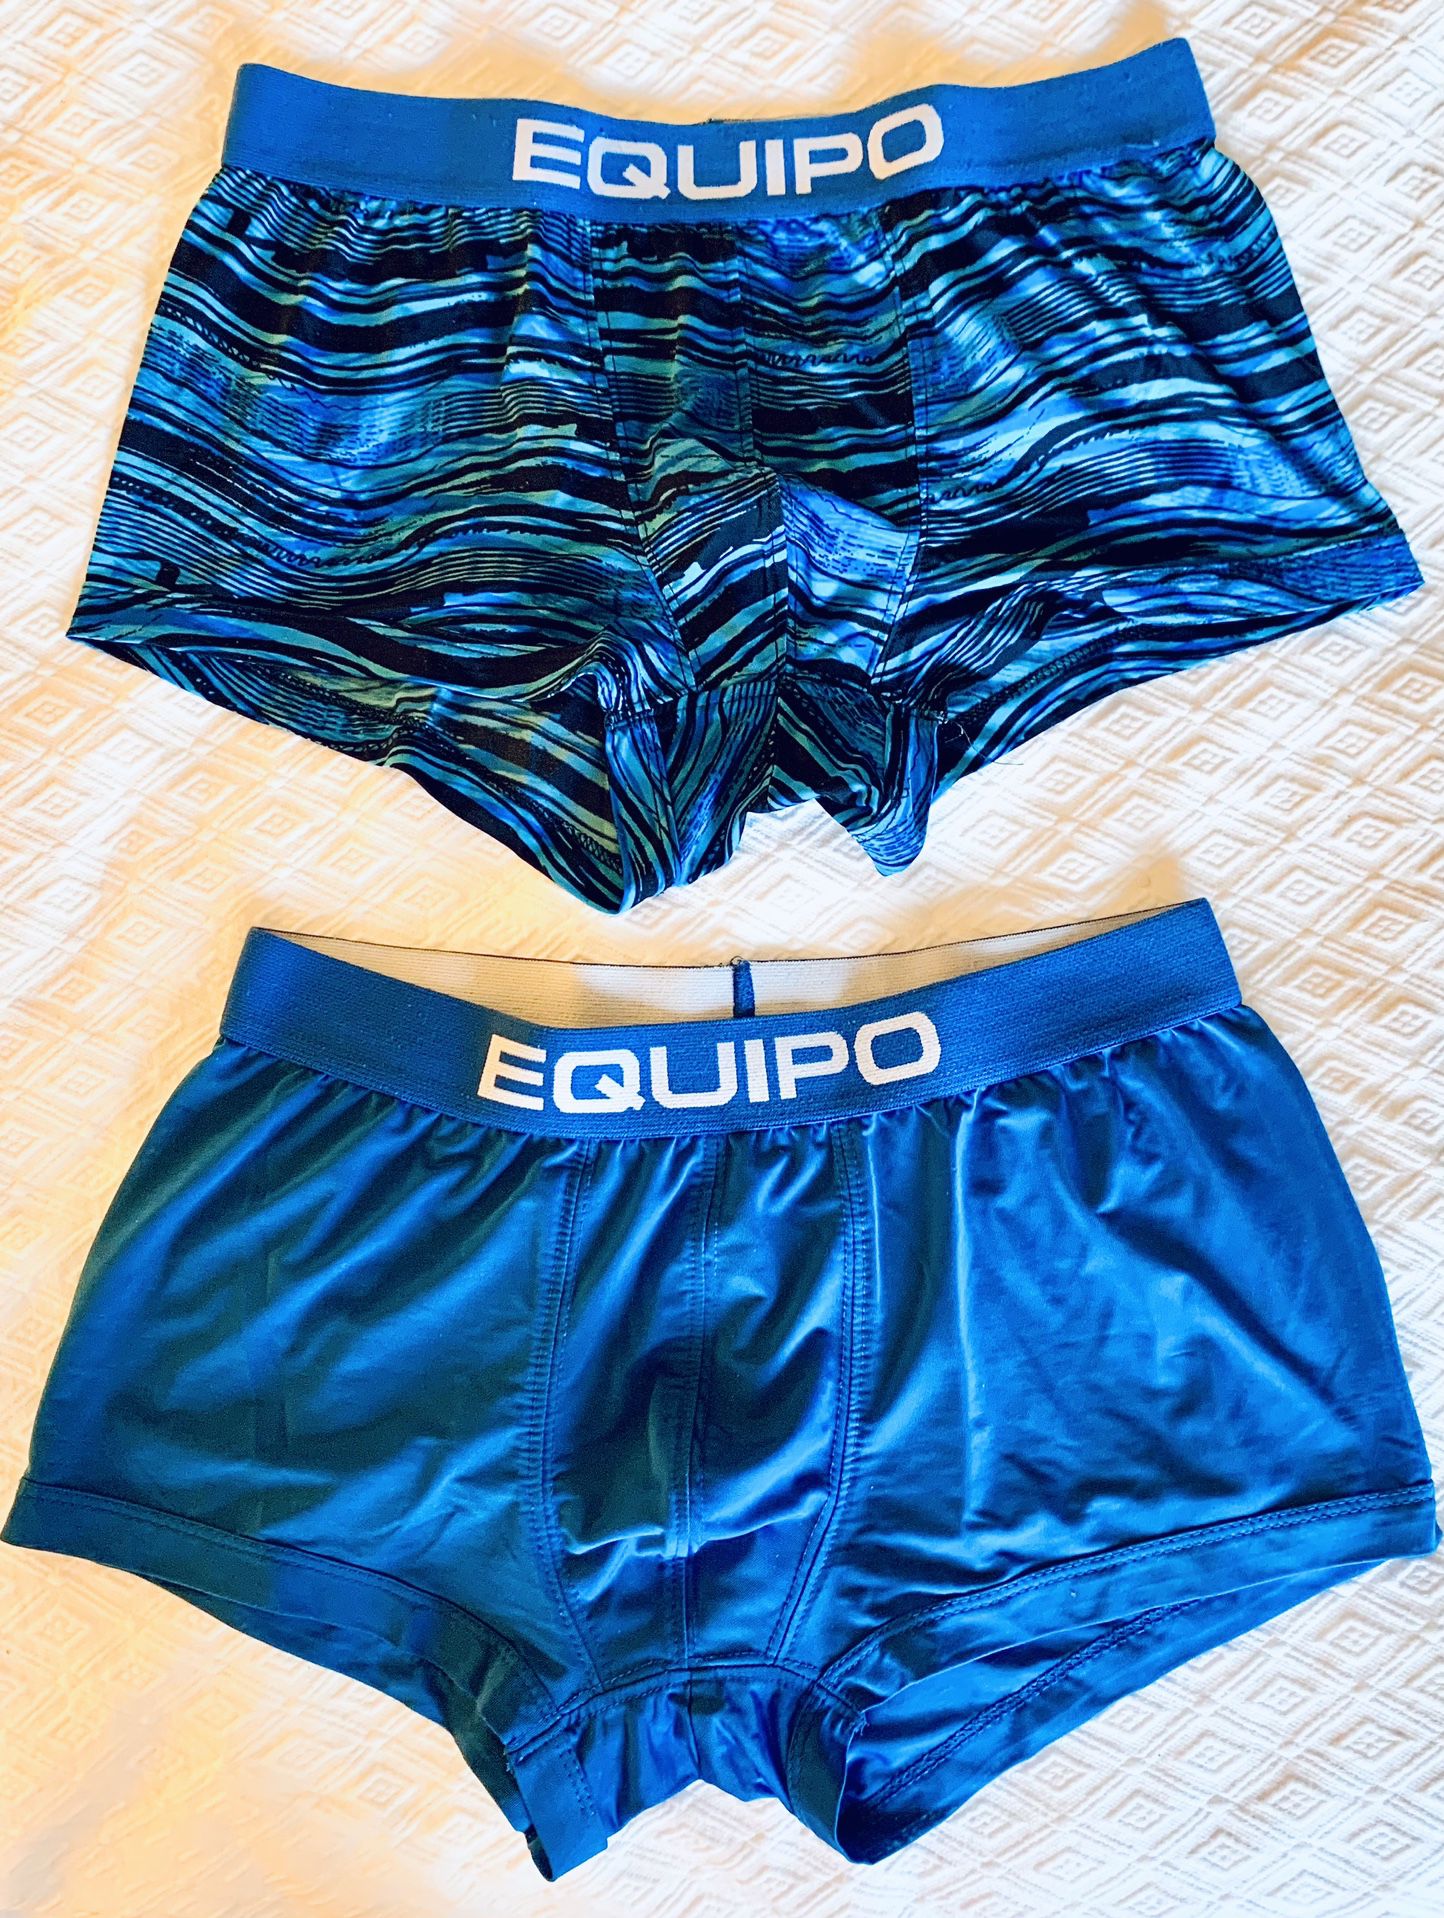 Equipo Men's 2-pack Grid & Solid Microfiber Stretch Brazilian Trunks for  Sale in Portland, OR - OfferUp